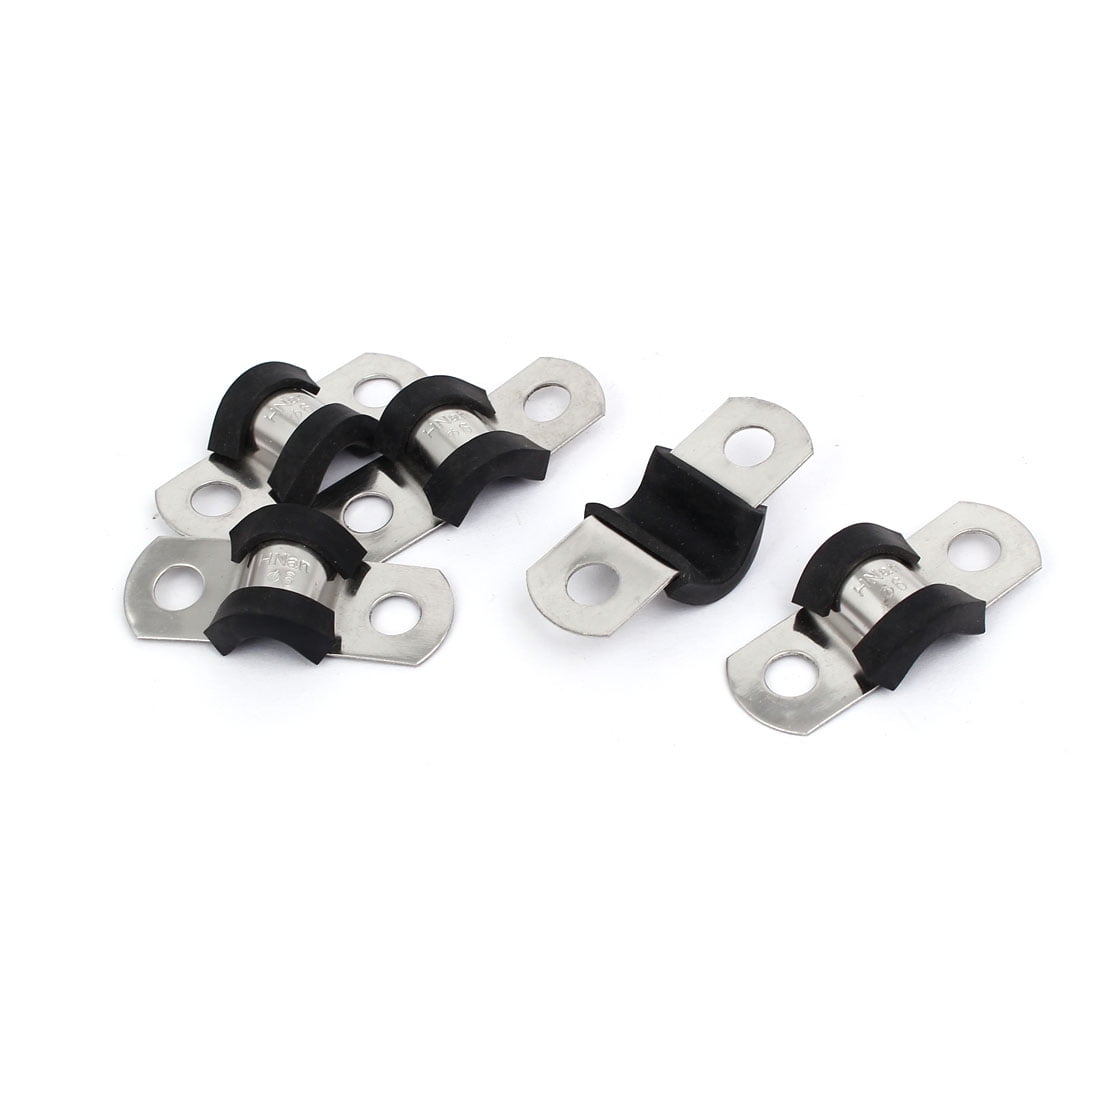 15mm U Clips EPDM Rubber Lined Mounting Brackets Clamps 5 Pcs 